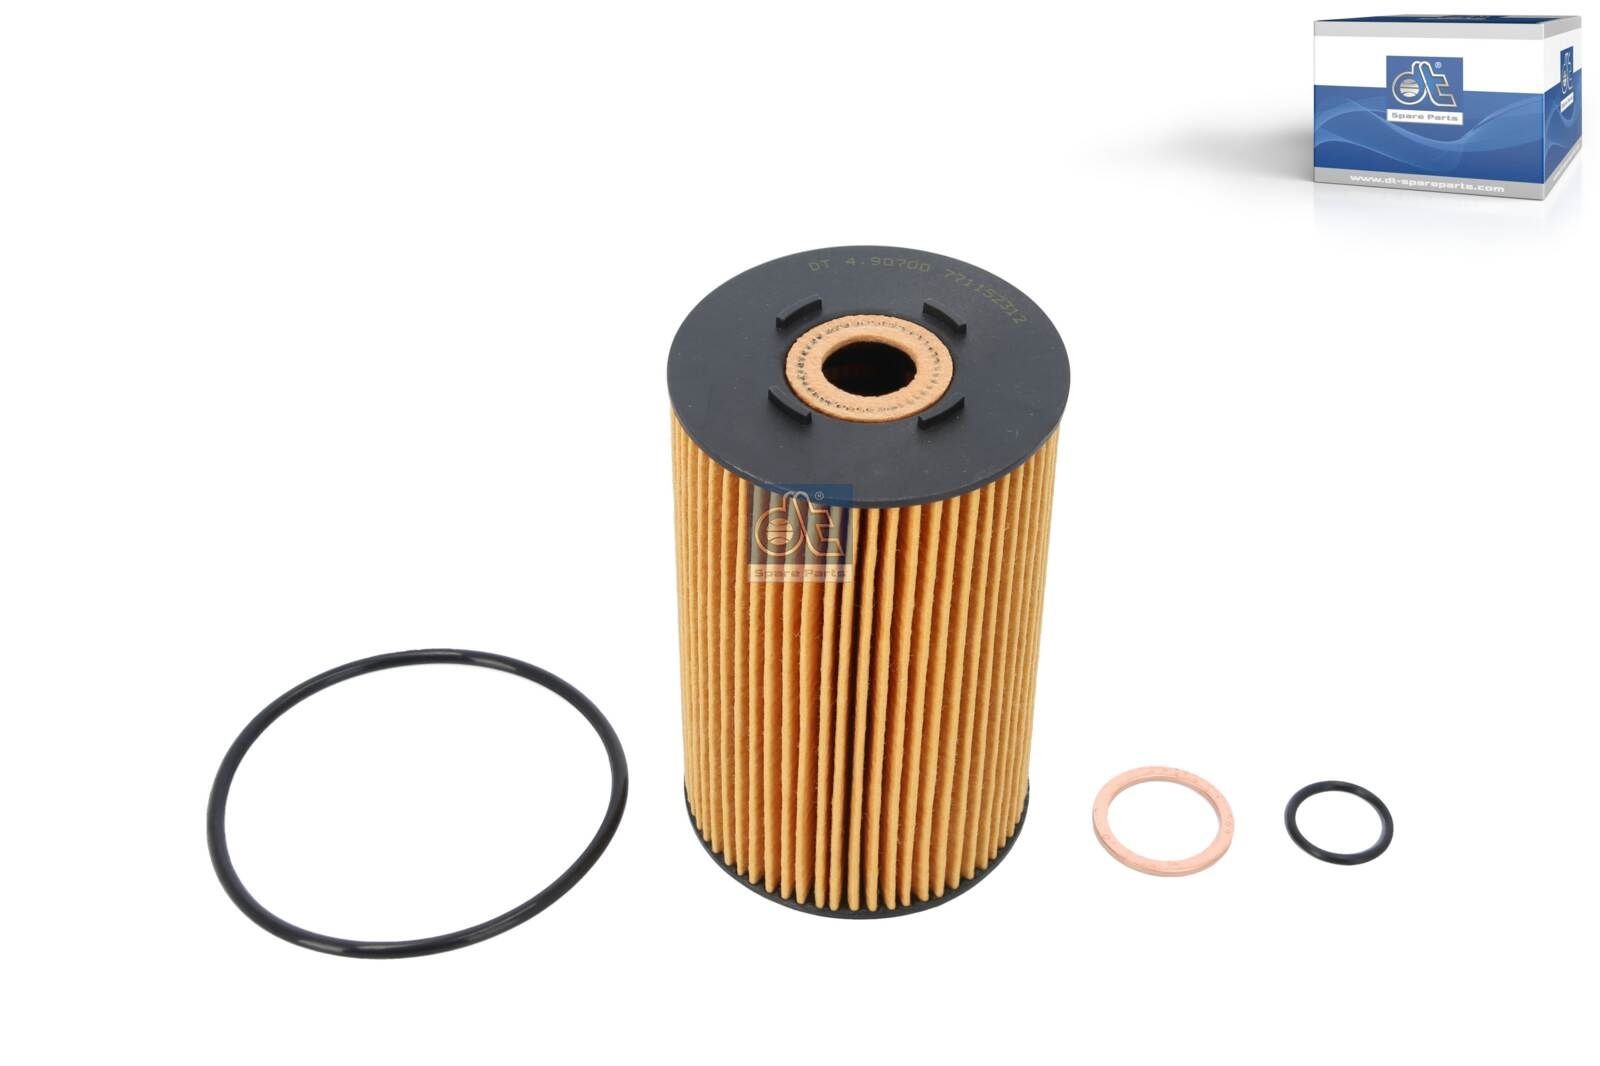 HU 932/4 n DT Spare Parts 4.90700 Oil filter A366 184 0225